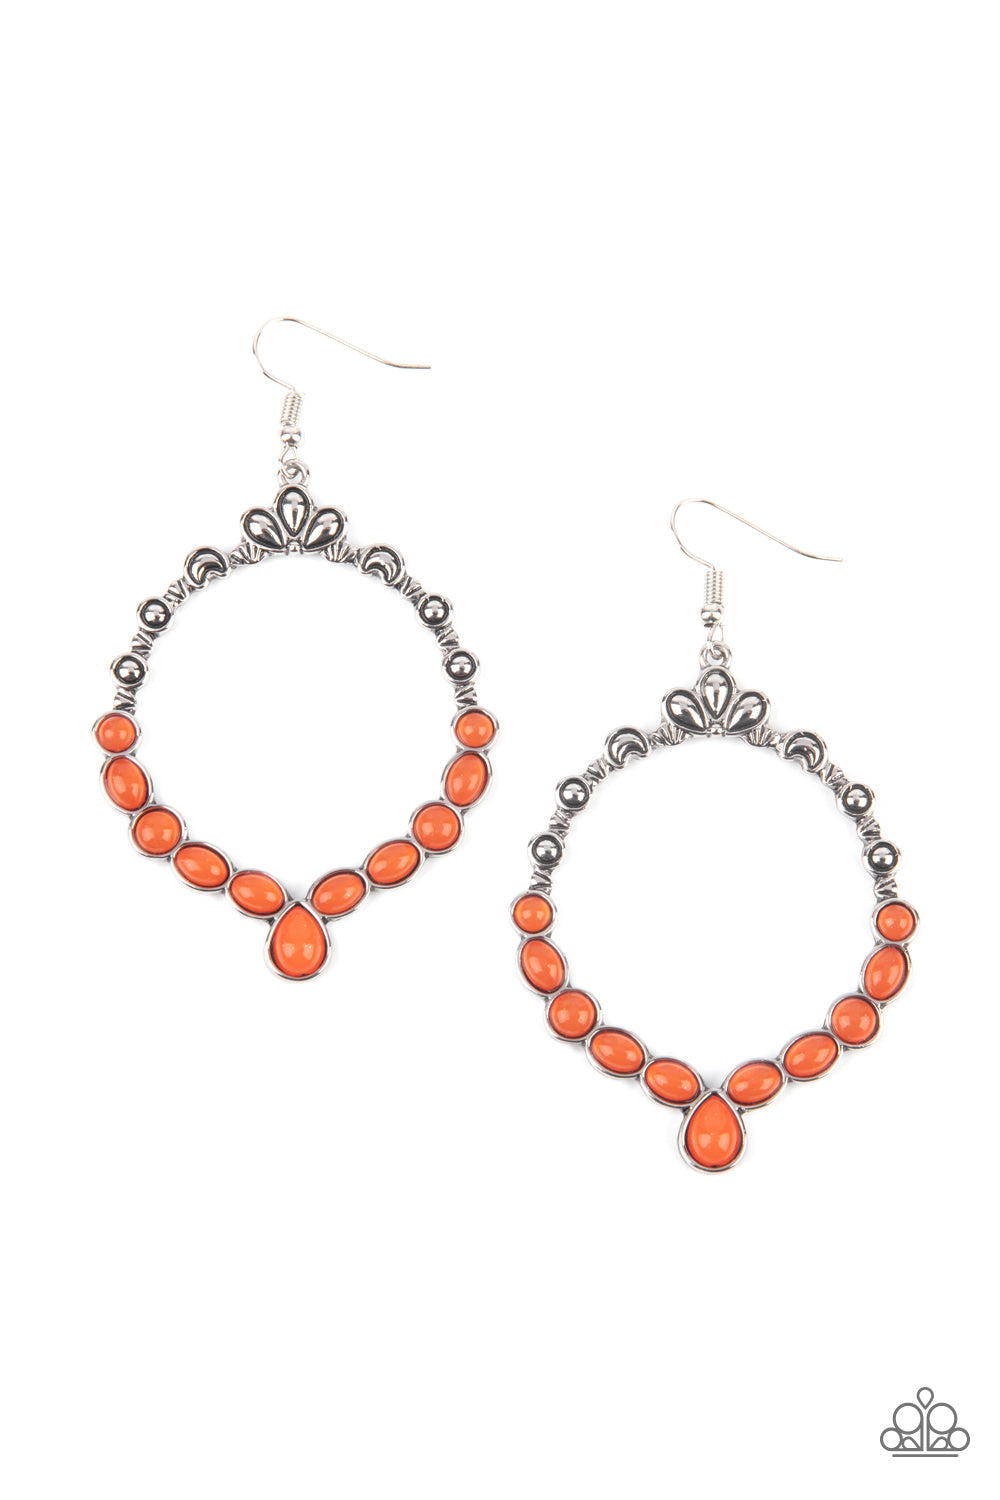 Ornate floral motifs decorate the top half of an airy circular silver frame. A row of dewy orange oval and round beads creates a border along the lower half of the frame, culminating in a single teardrop accent for a demurely enchanting lure. Earring attaches to a standard fishhook fitting.